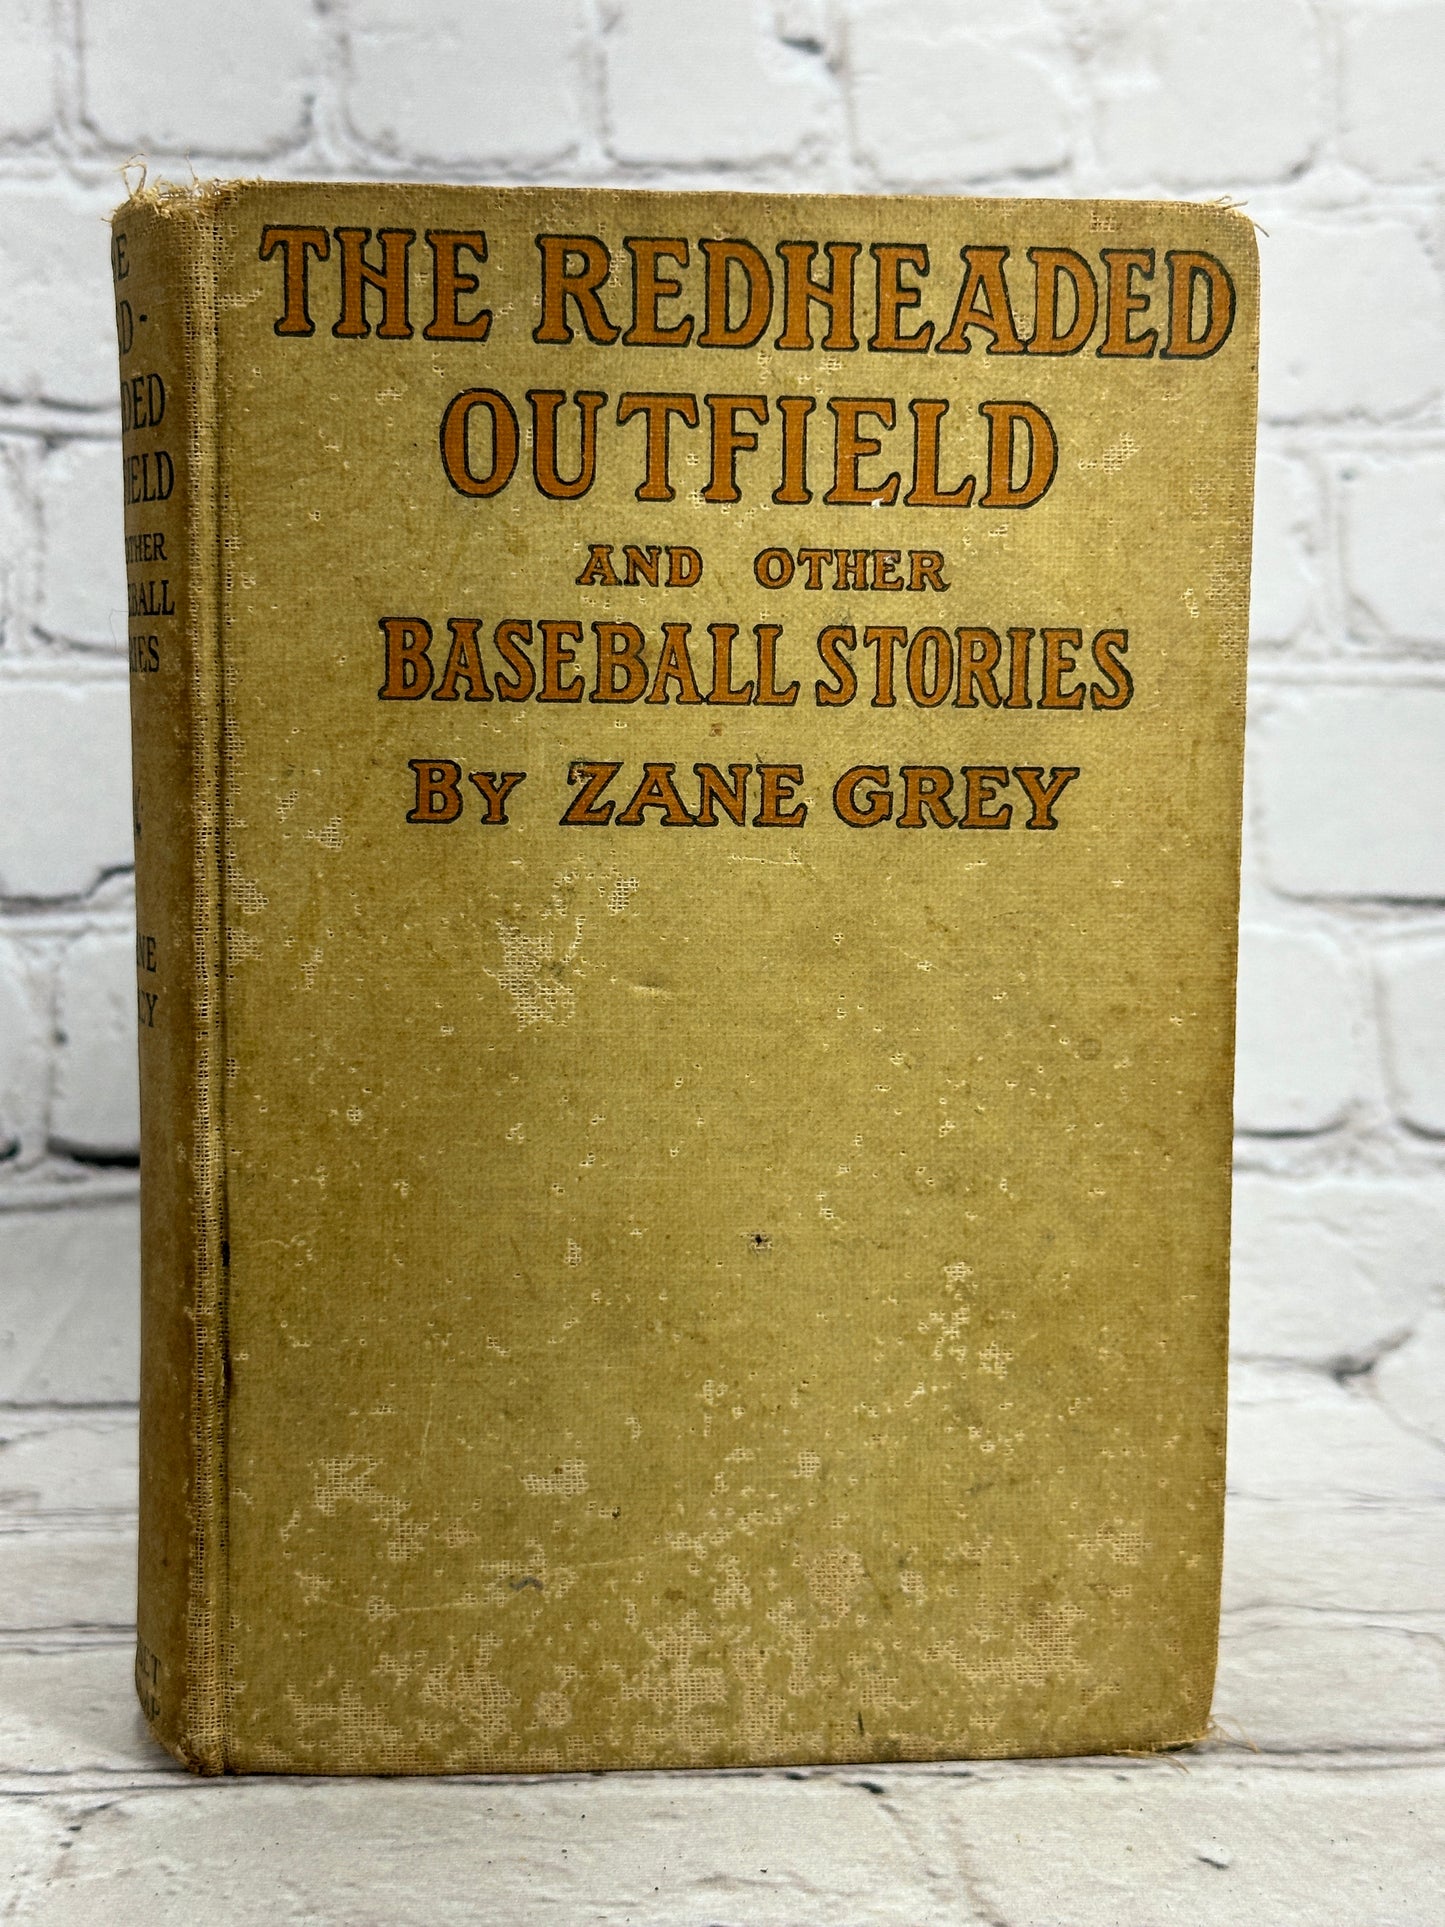 The Redheaded Outfield And Other Baseball Stories By Zane Grey [1920]